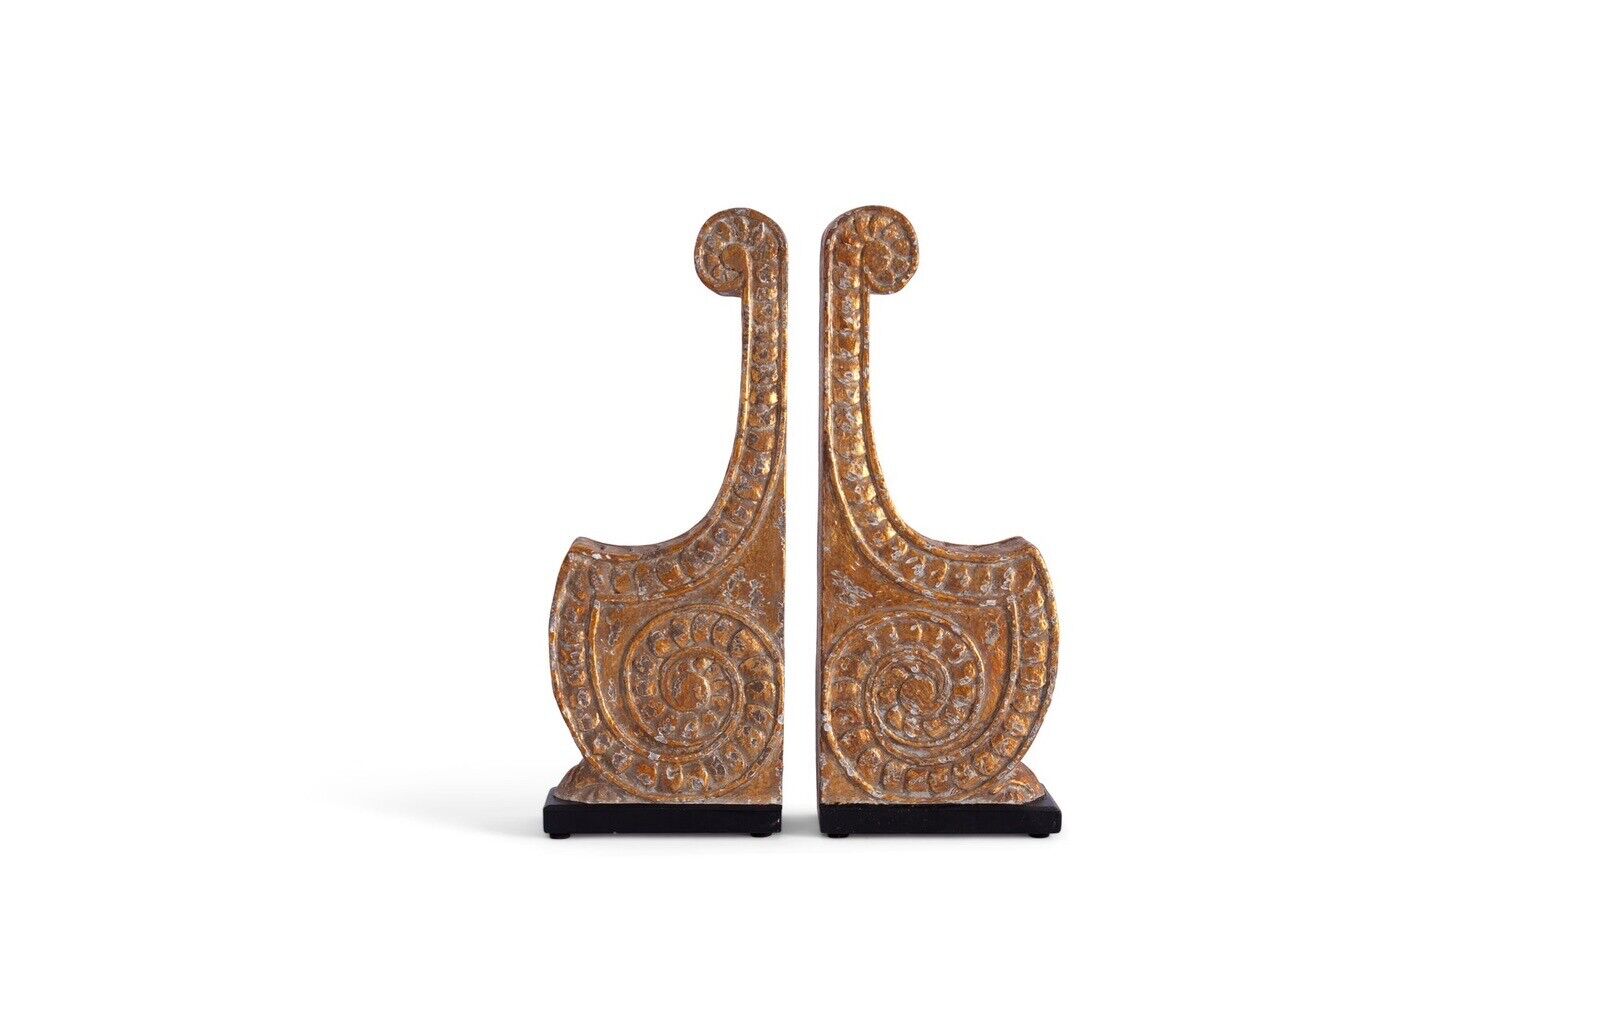 Bliss Studio Gold Scroll Bookends $444